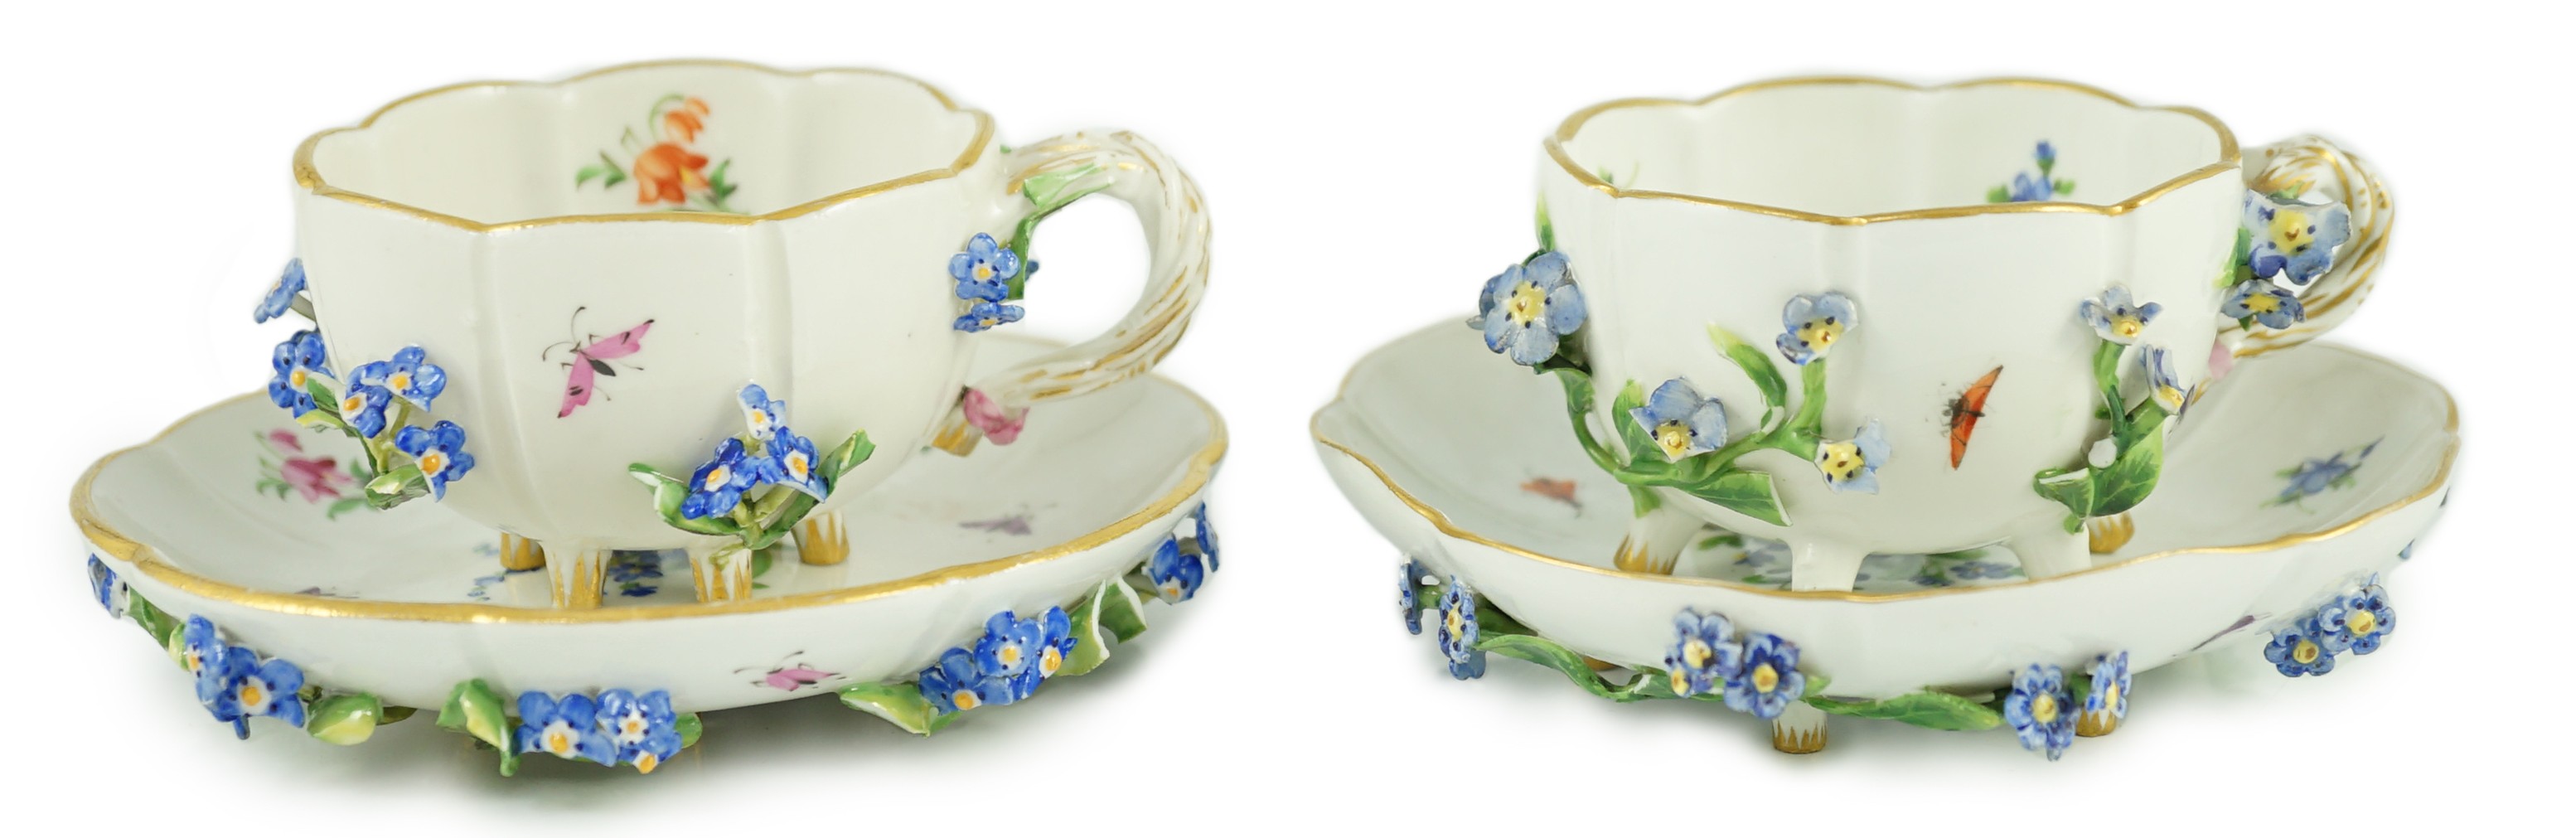 Two Meissen flower encrusted cups and saucers, 19th century, saucers 12cm wide, chips to flowers and leaves